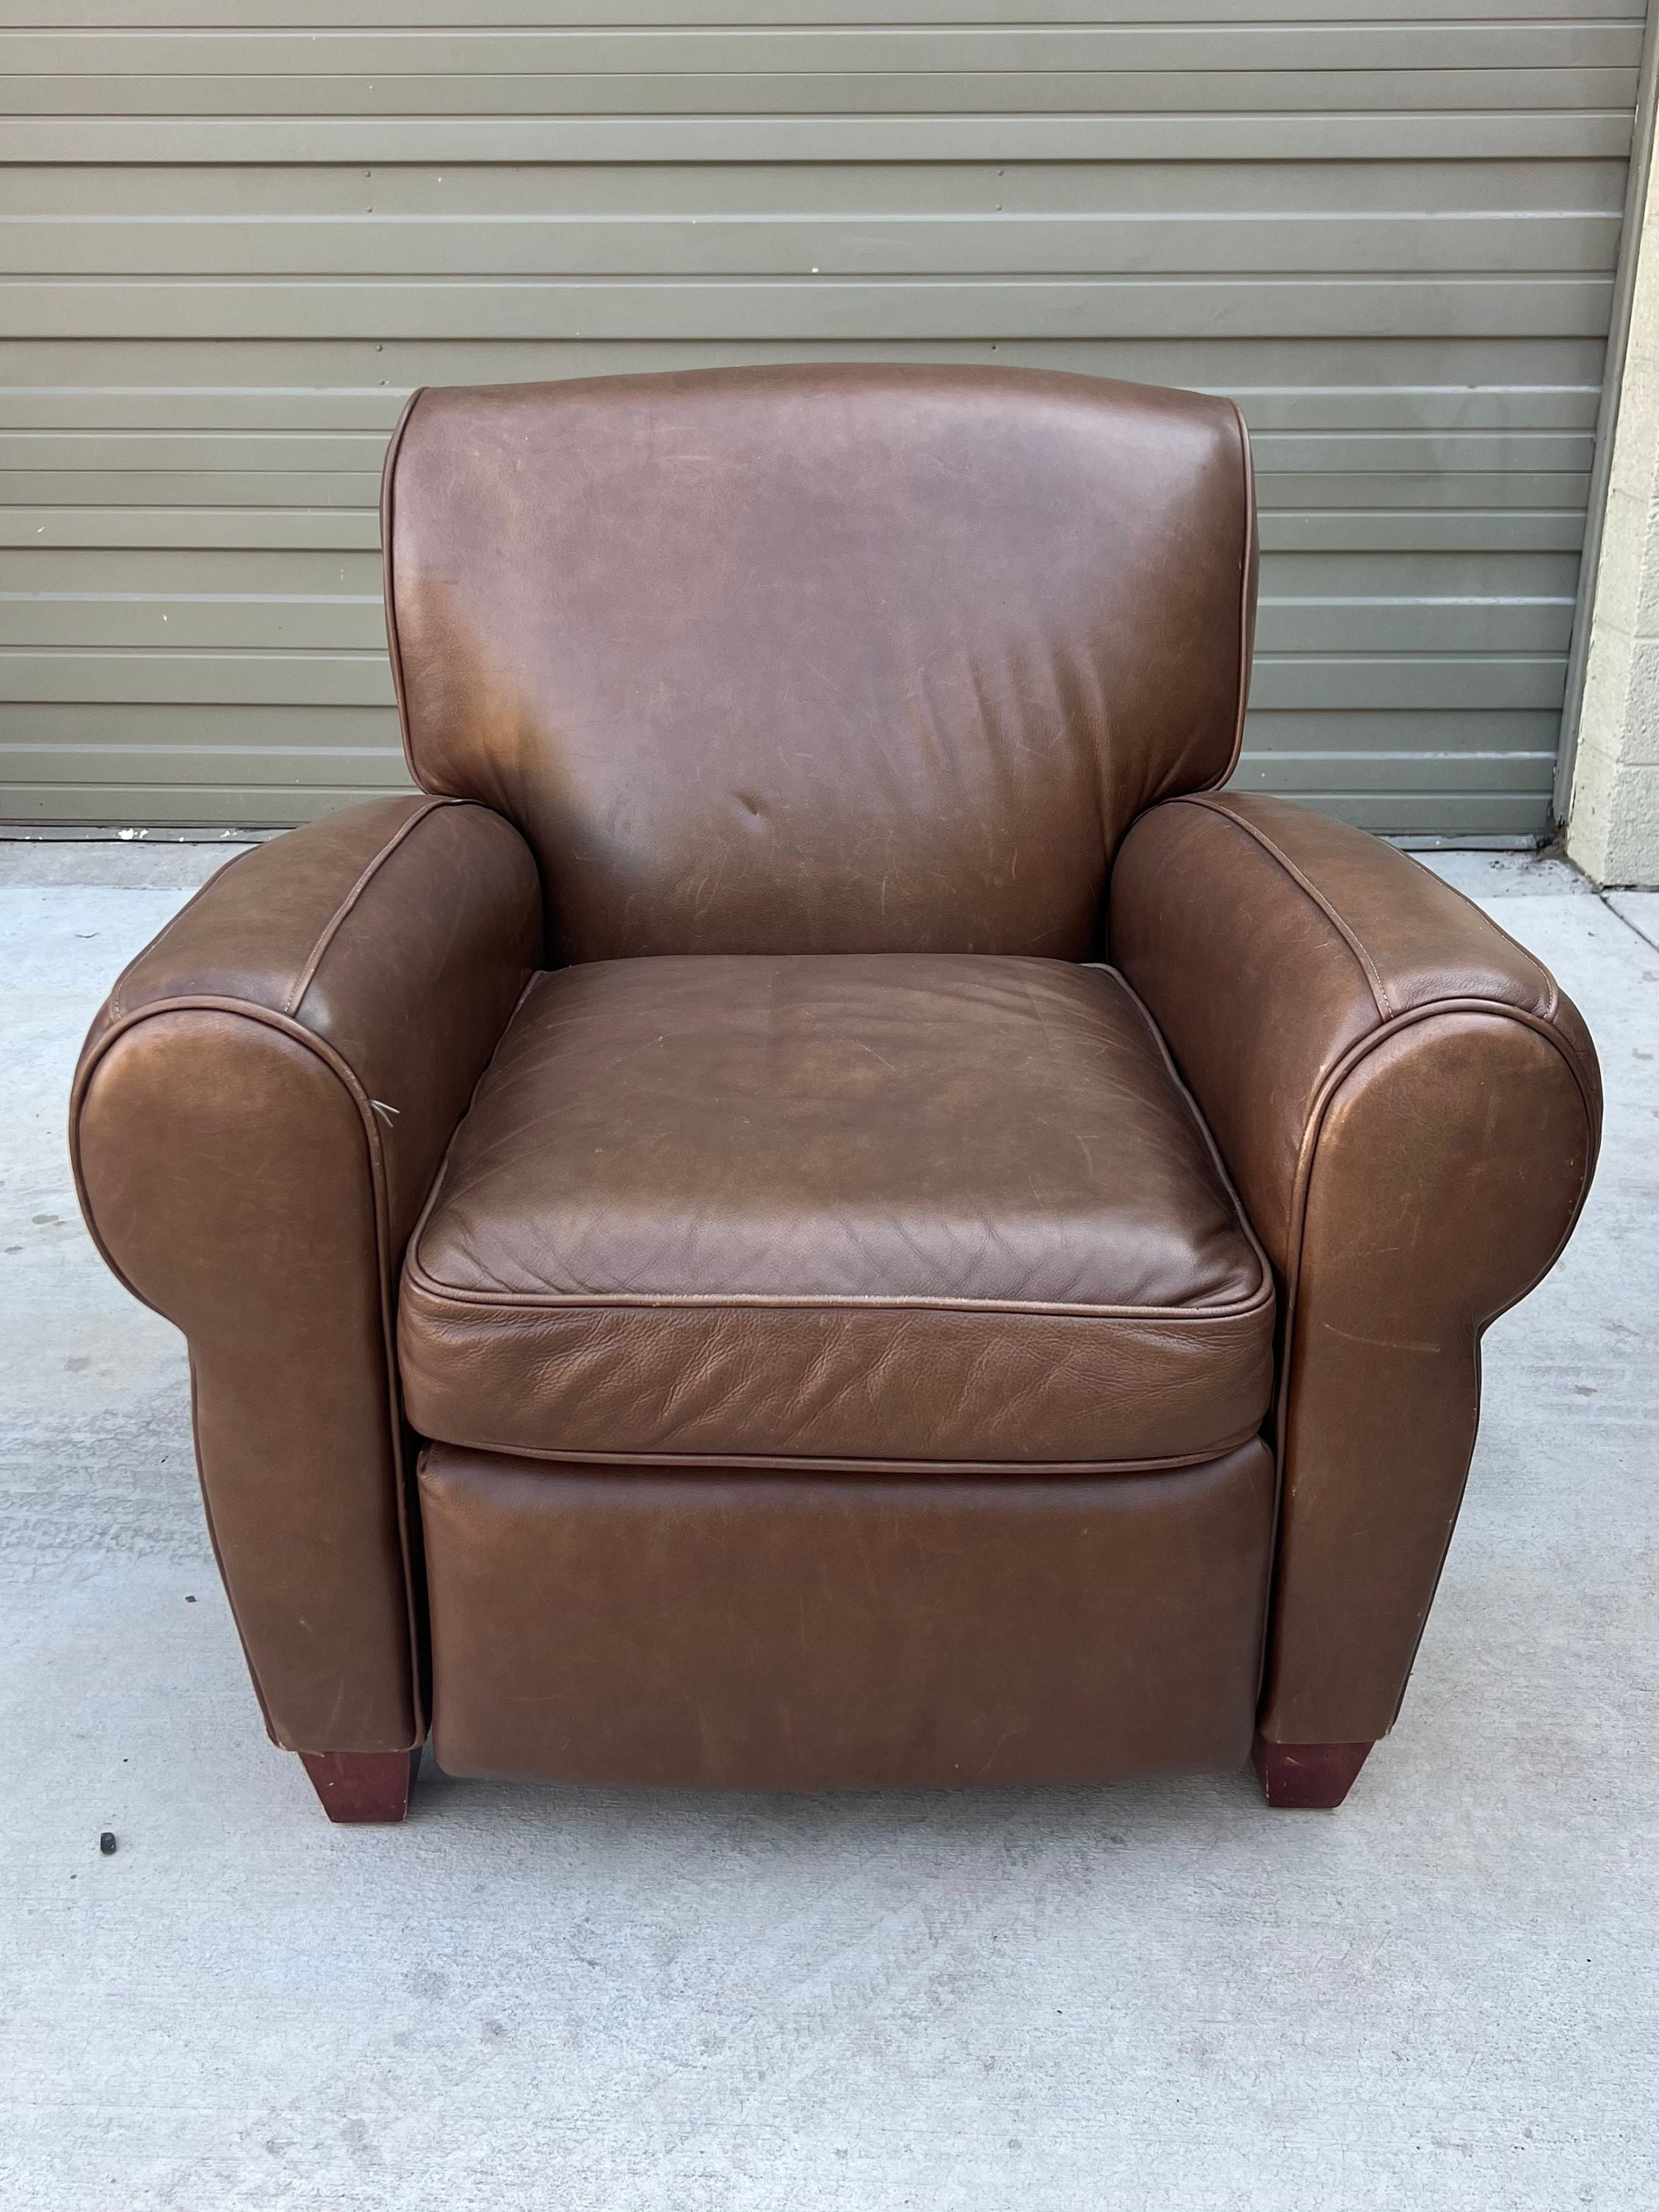 Genuine Cowhide Leather Recliner Beanbag Chairs Tan - Only Beanbag